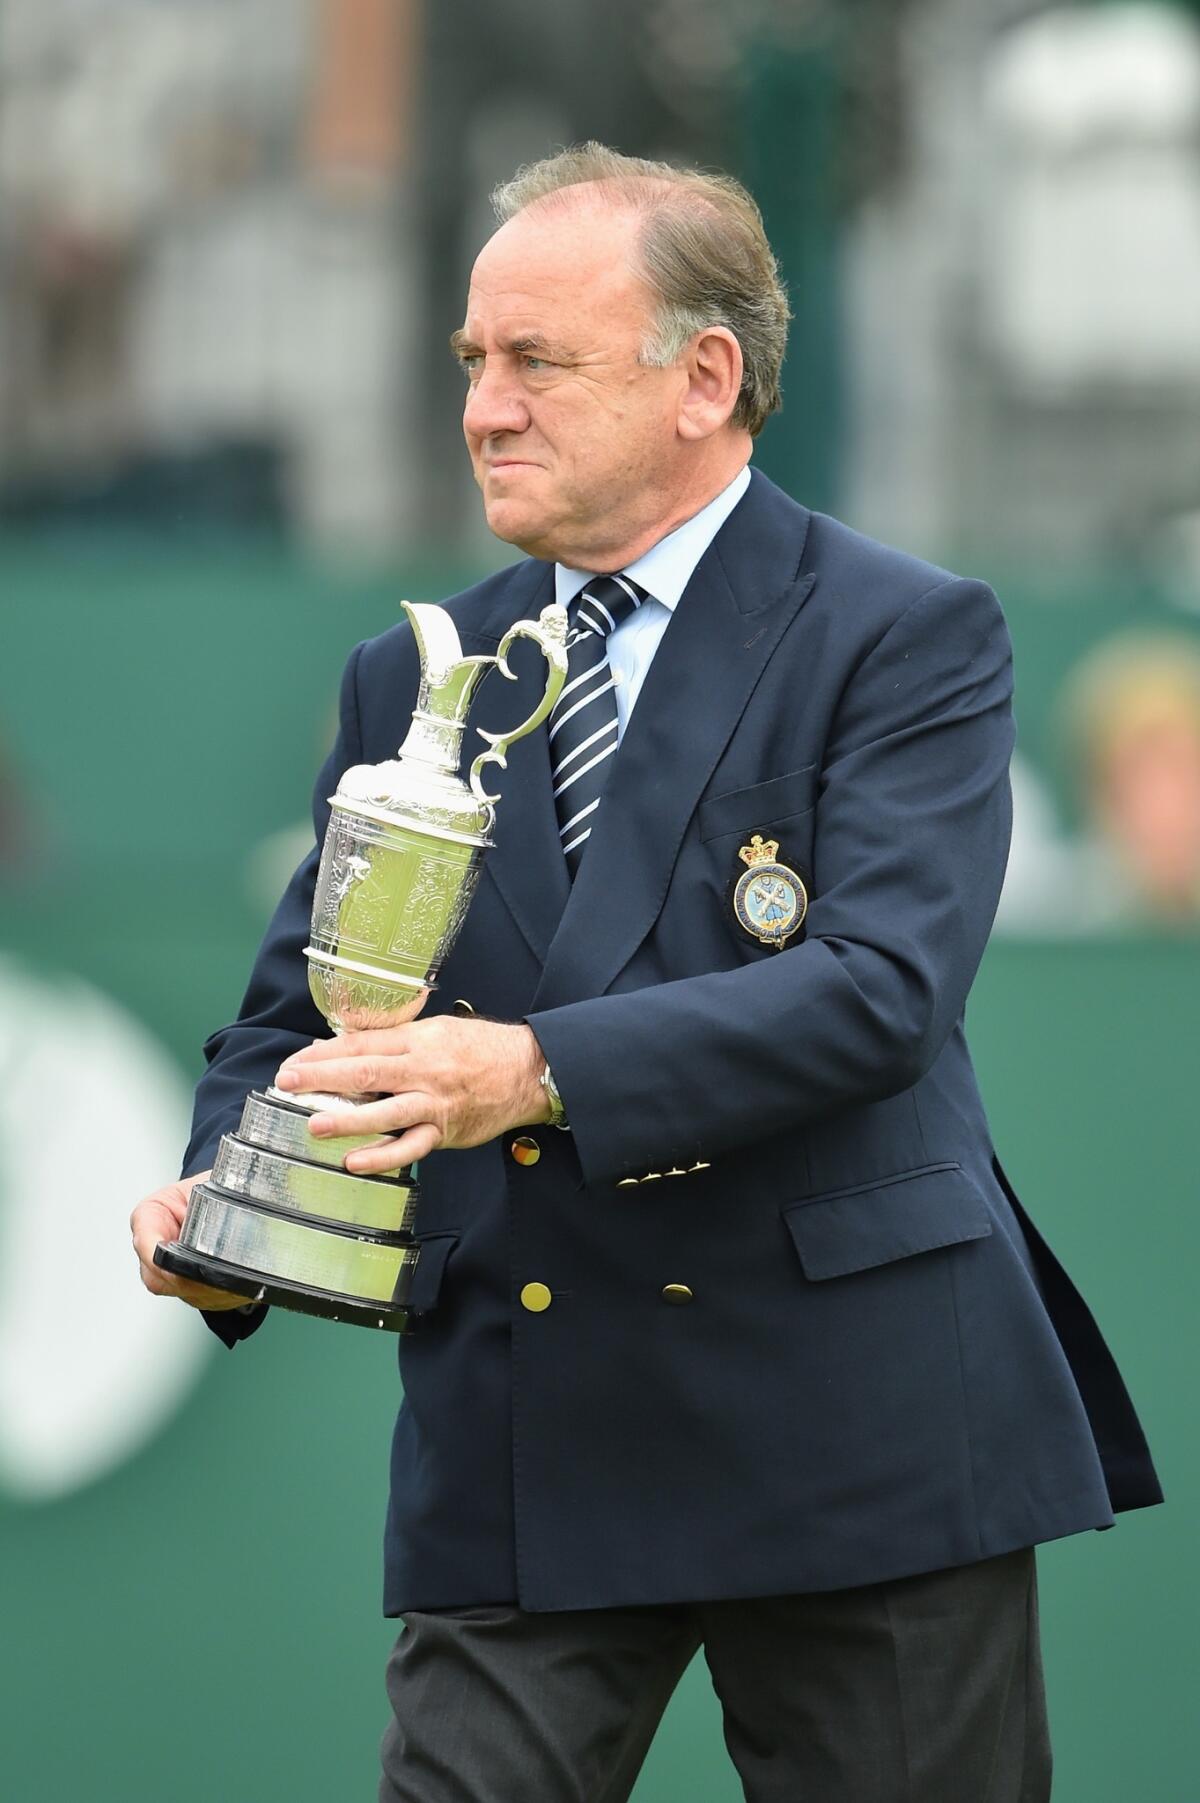 Peter Dawson, chief executive of the Royal & Ancient Golf Club, holds the Claret Jug on the 18th green after the final round of the 2014 British Open.